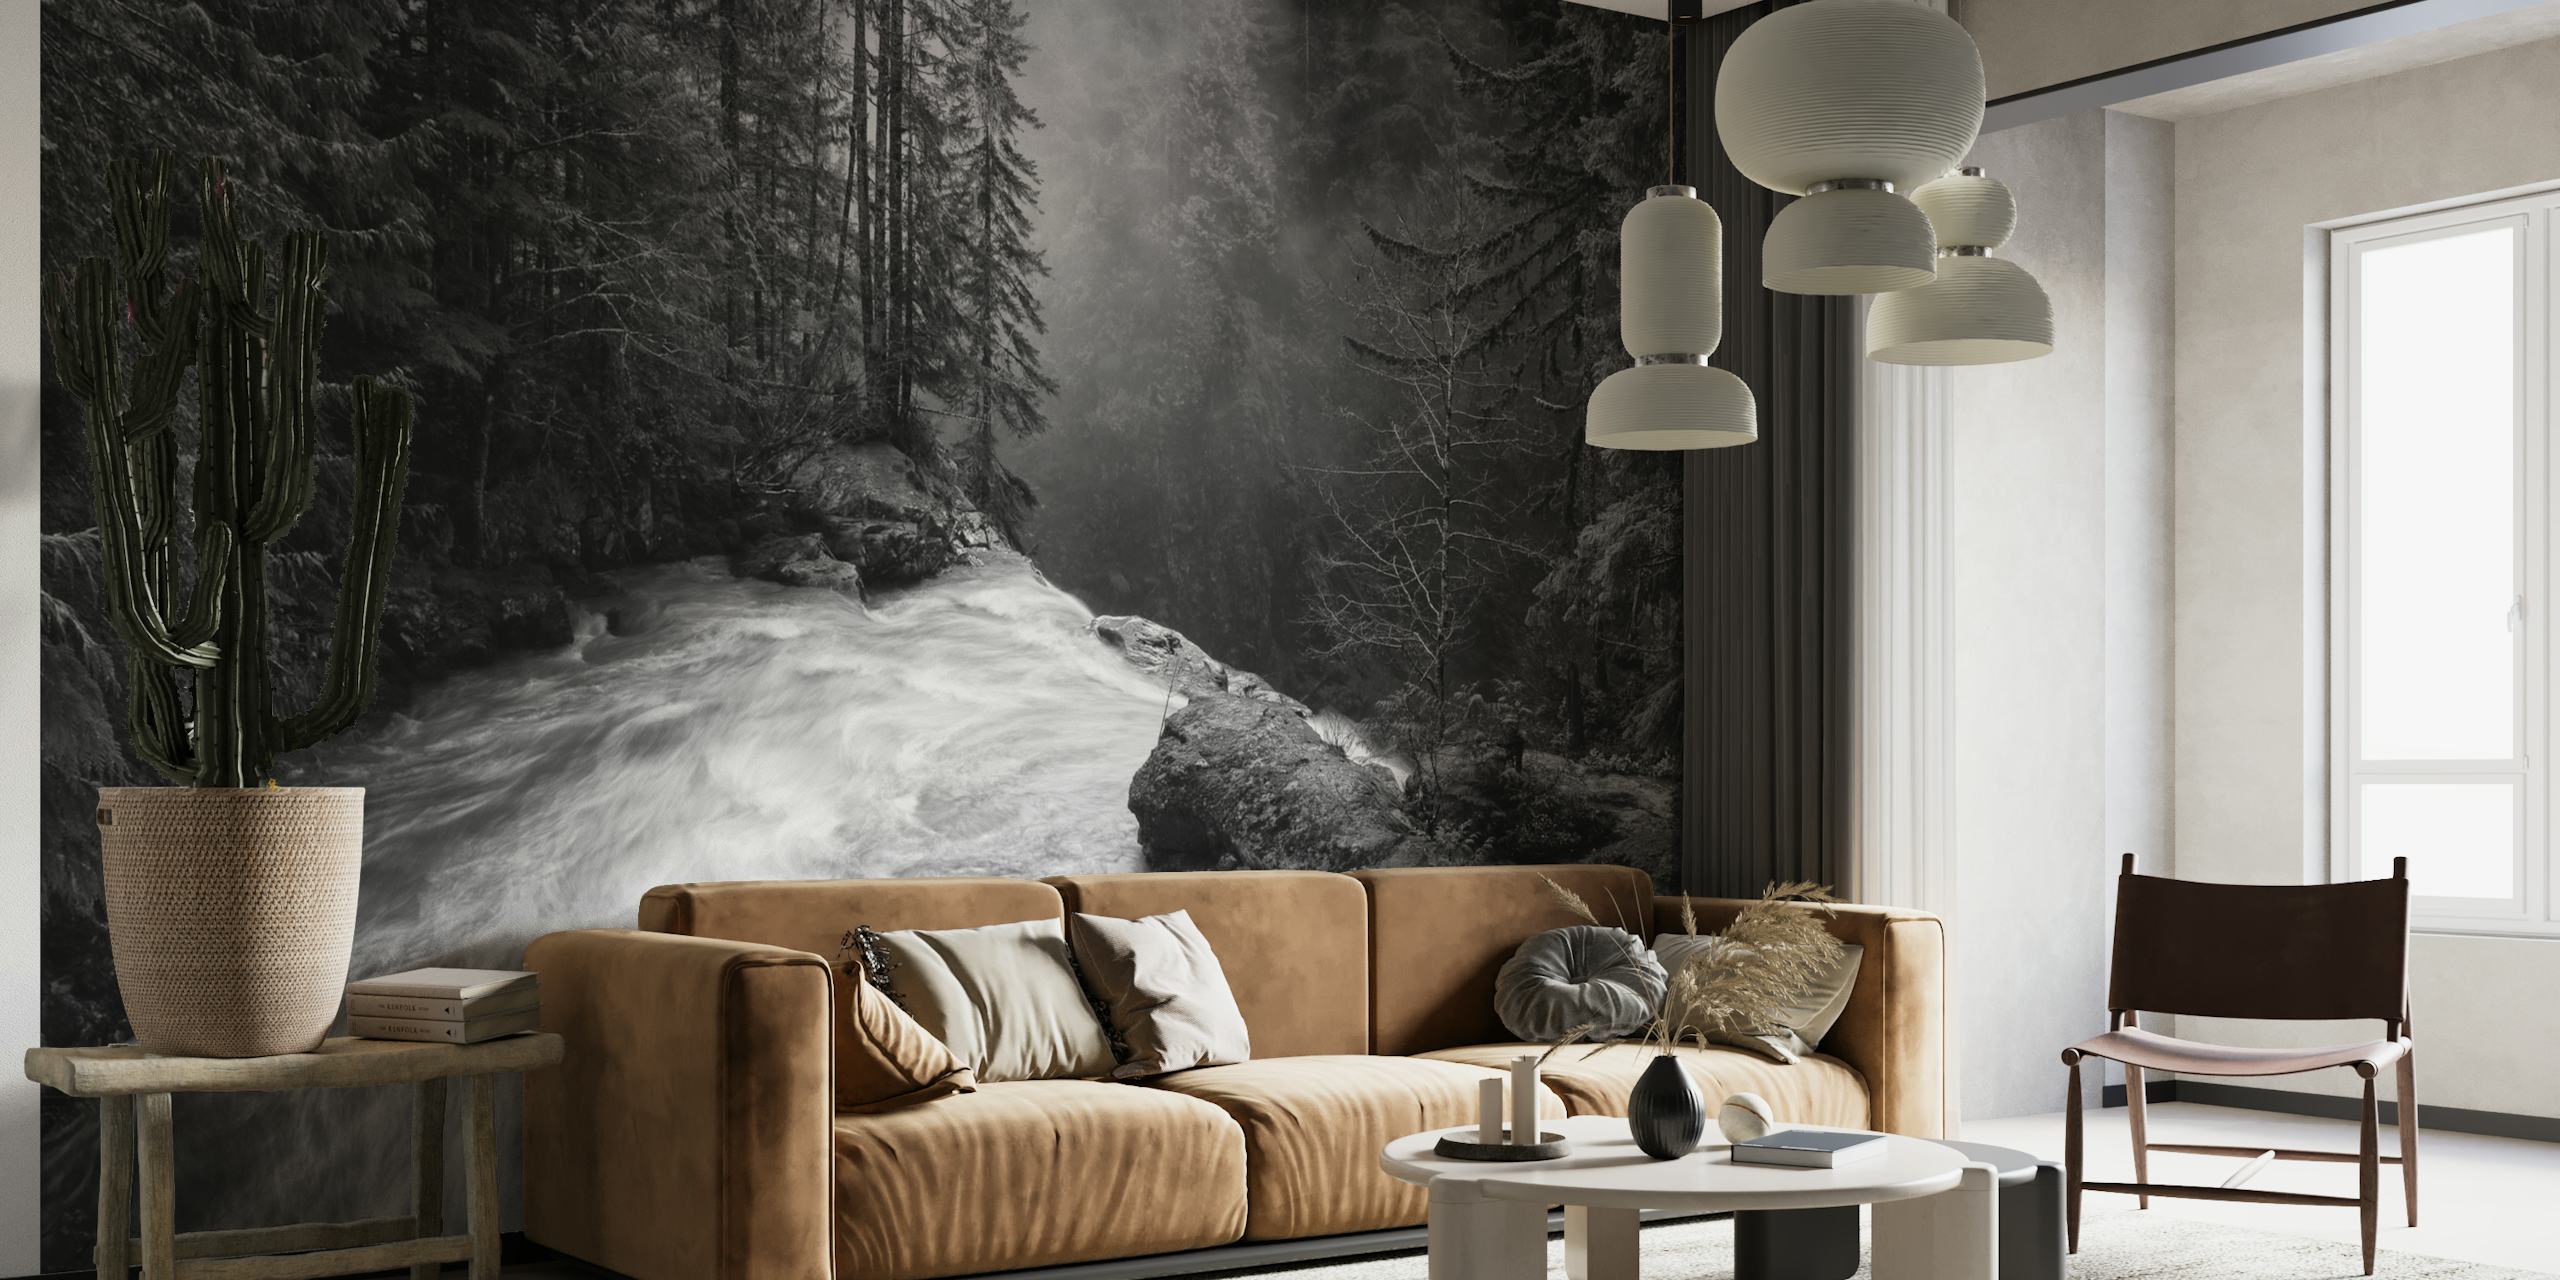 Black and white wall mural of a waterfall surrounded by forest